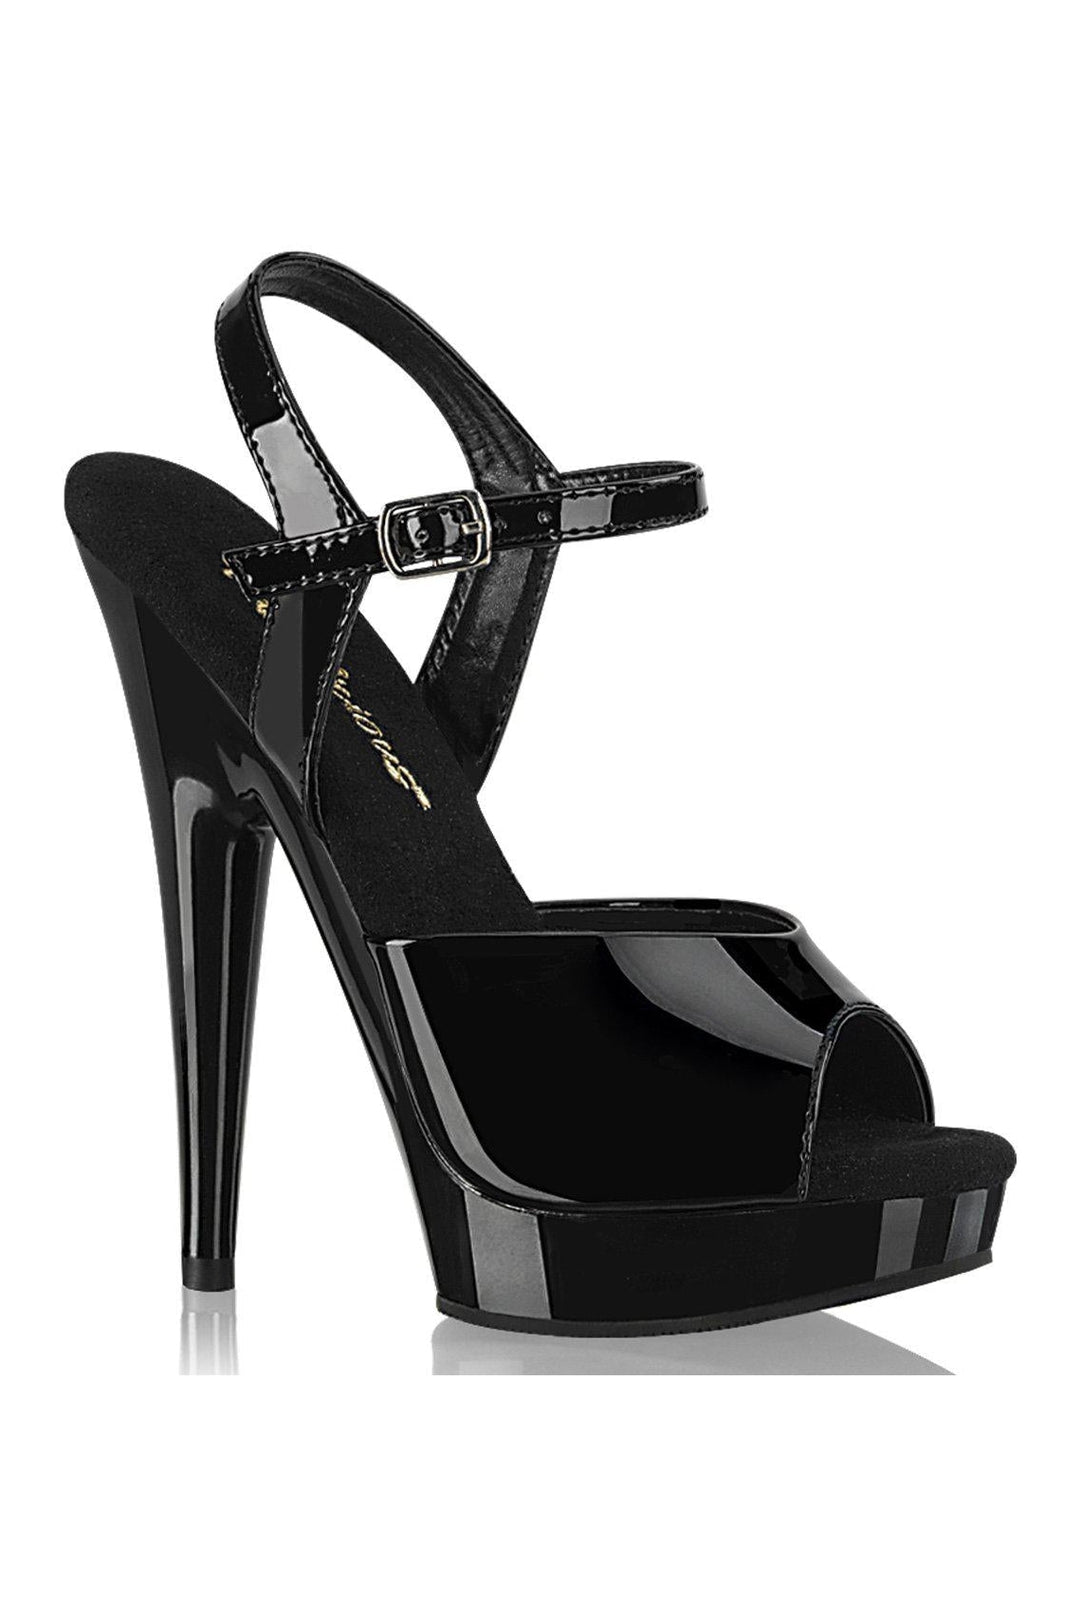 SULTRY-609 Sandal | Black Patent-Sandals-Fabulicious-Black-6-Patent-SEXYSHOES.COM